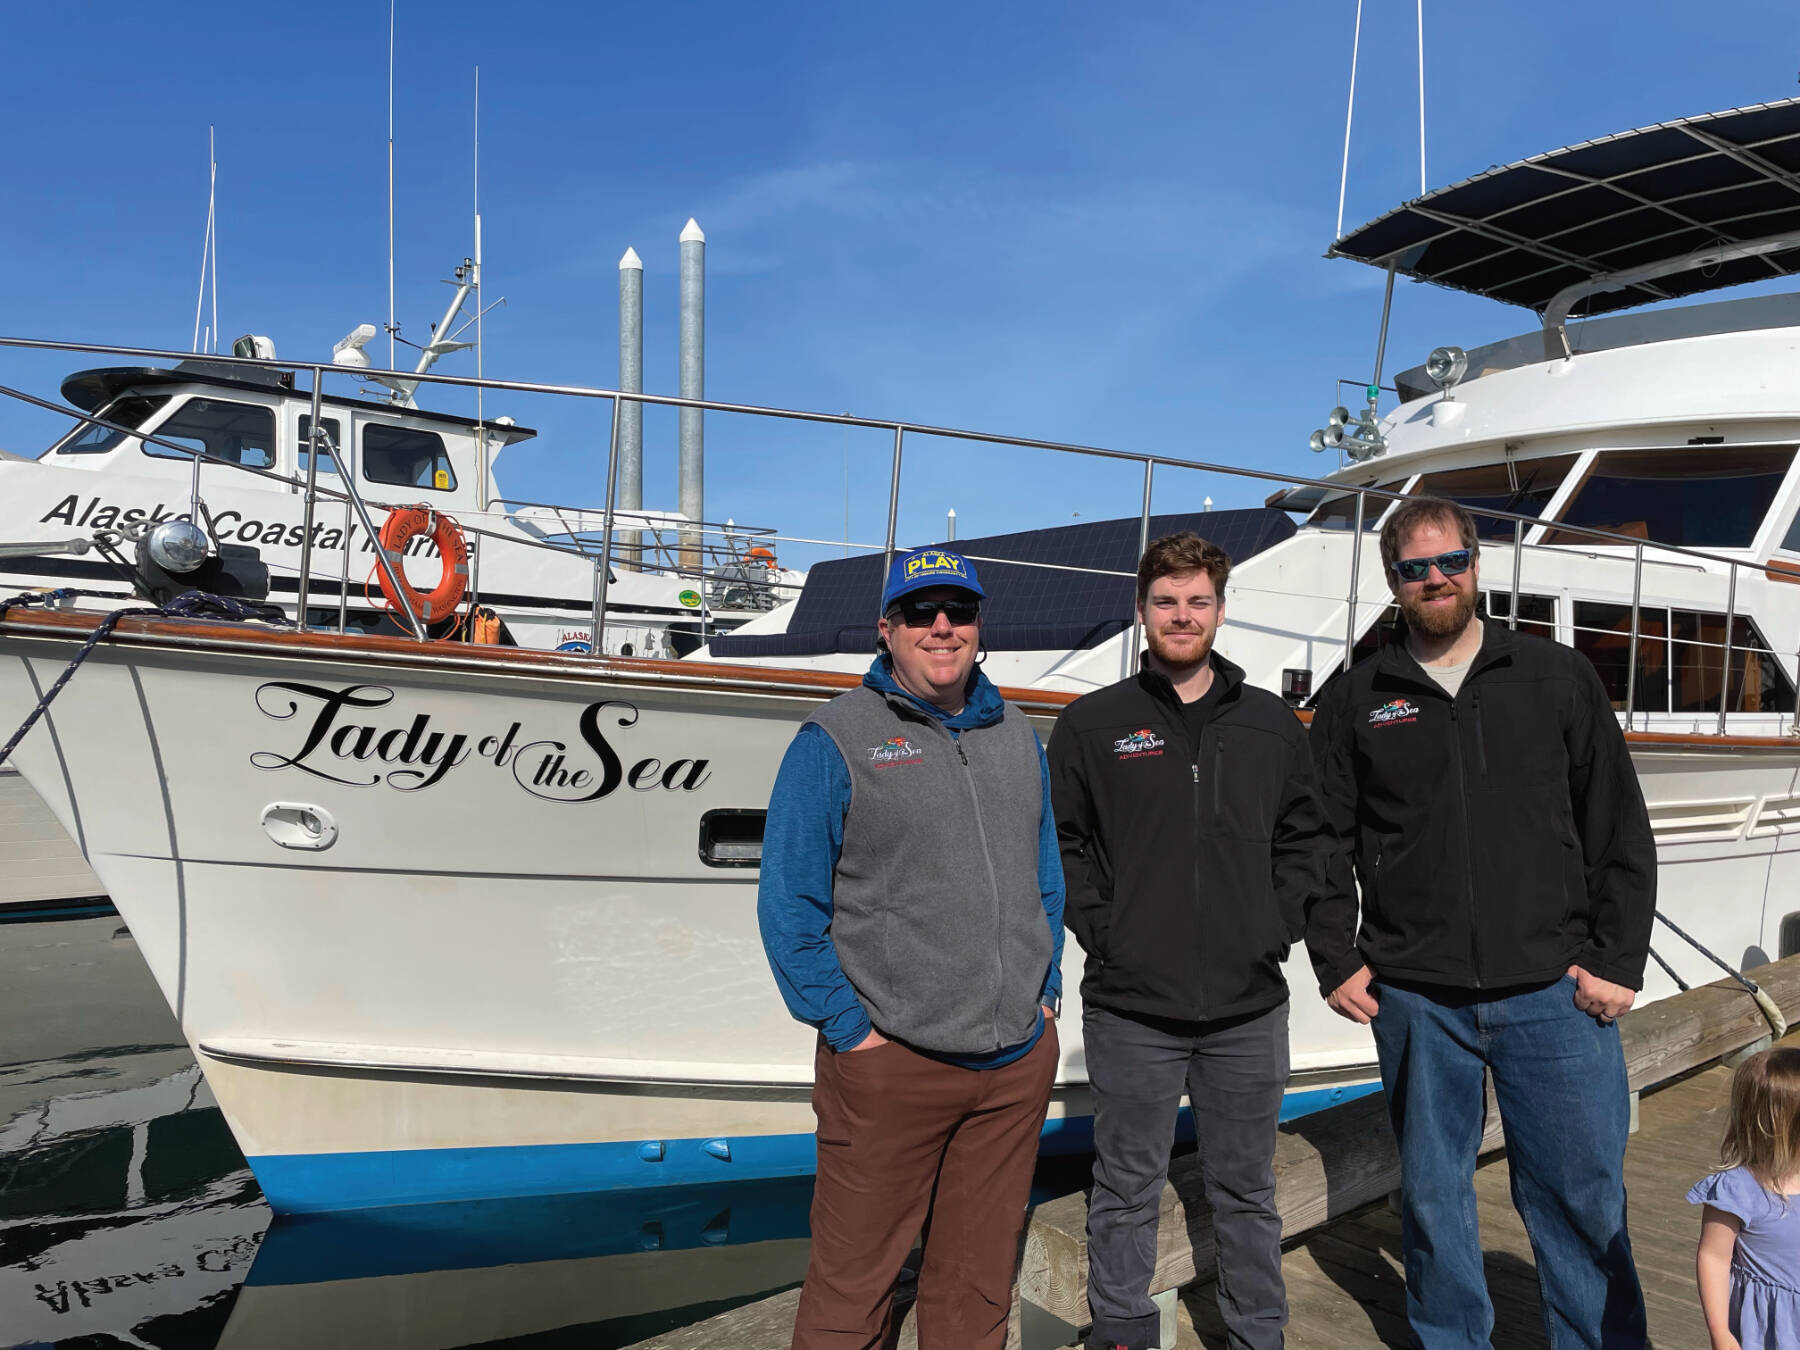 Second captain Mike Tozzo, chef Avram Salzman, and captain and owner Rand Seaton pose in front of the “Lady of the Sea” on Thursday, June 1, 2023 in the Homer Harbor in Homer, Alaska. Photo provided by Lauren Seaton